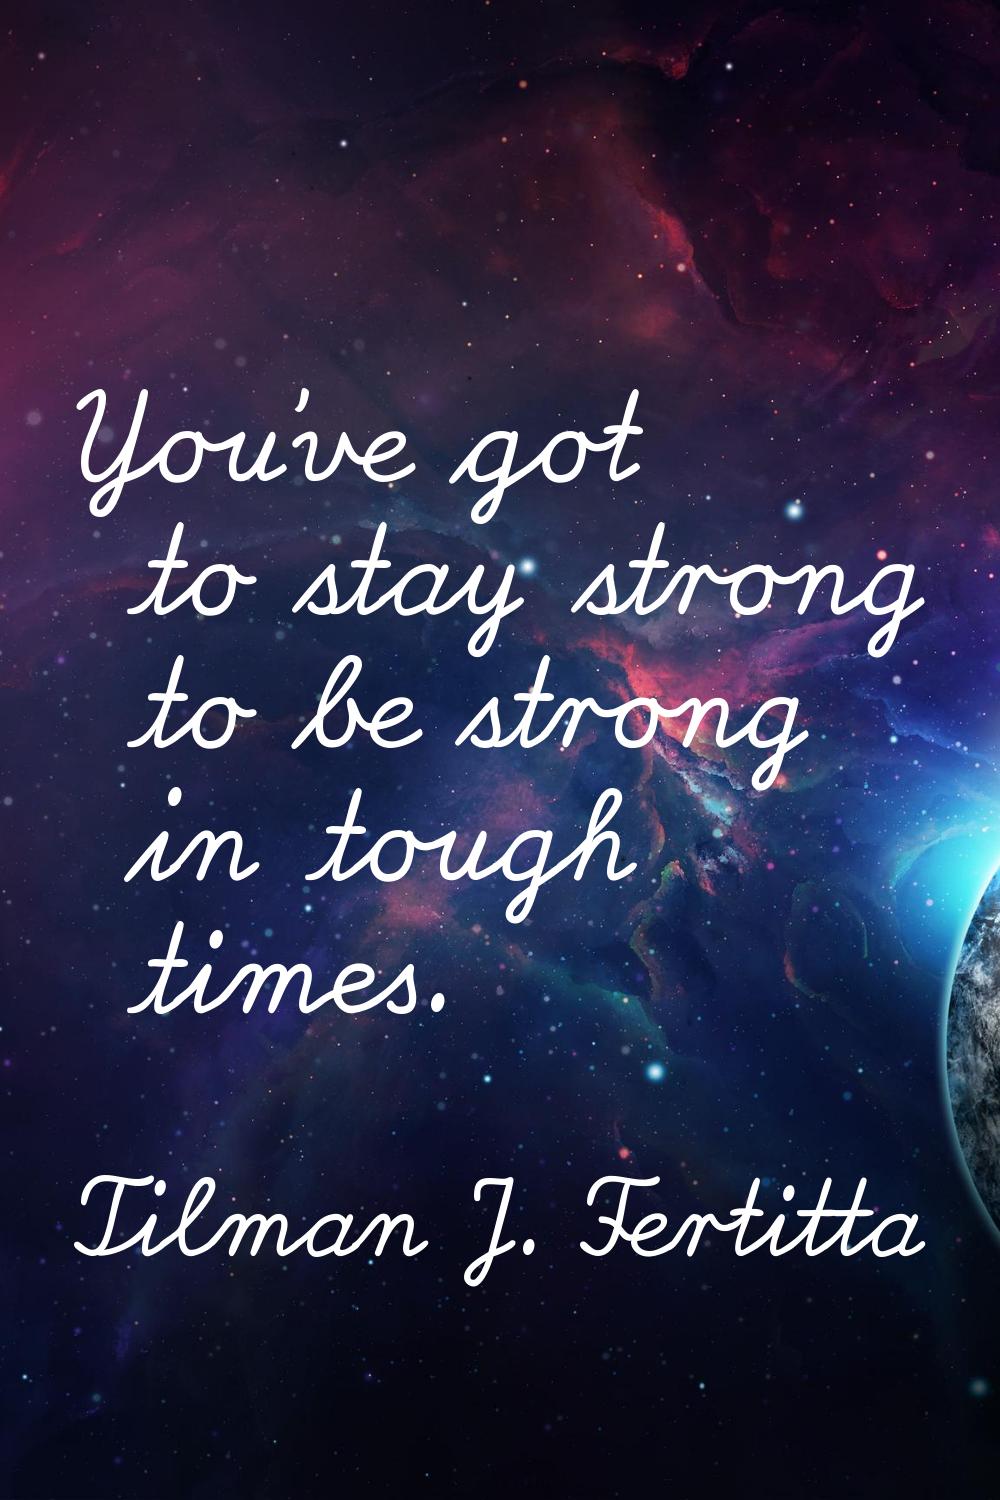 You've got to stay strong to be strong in tough times.